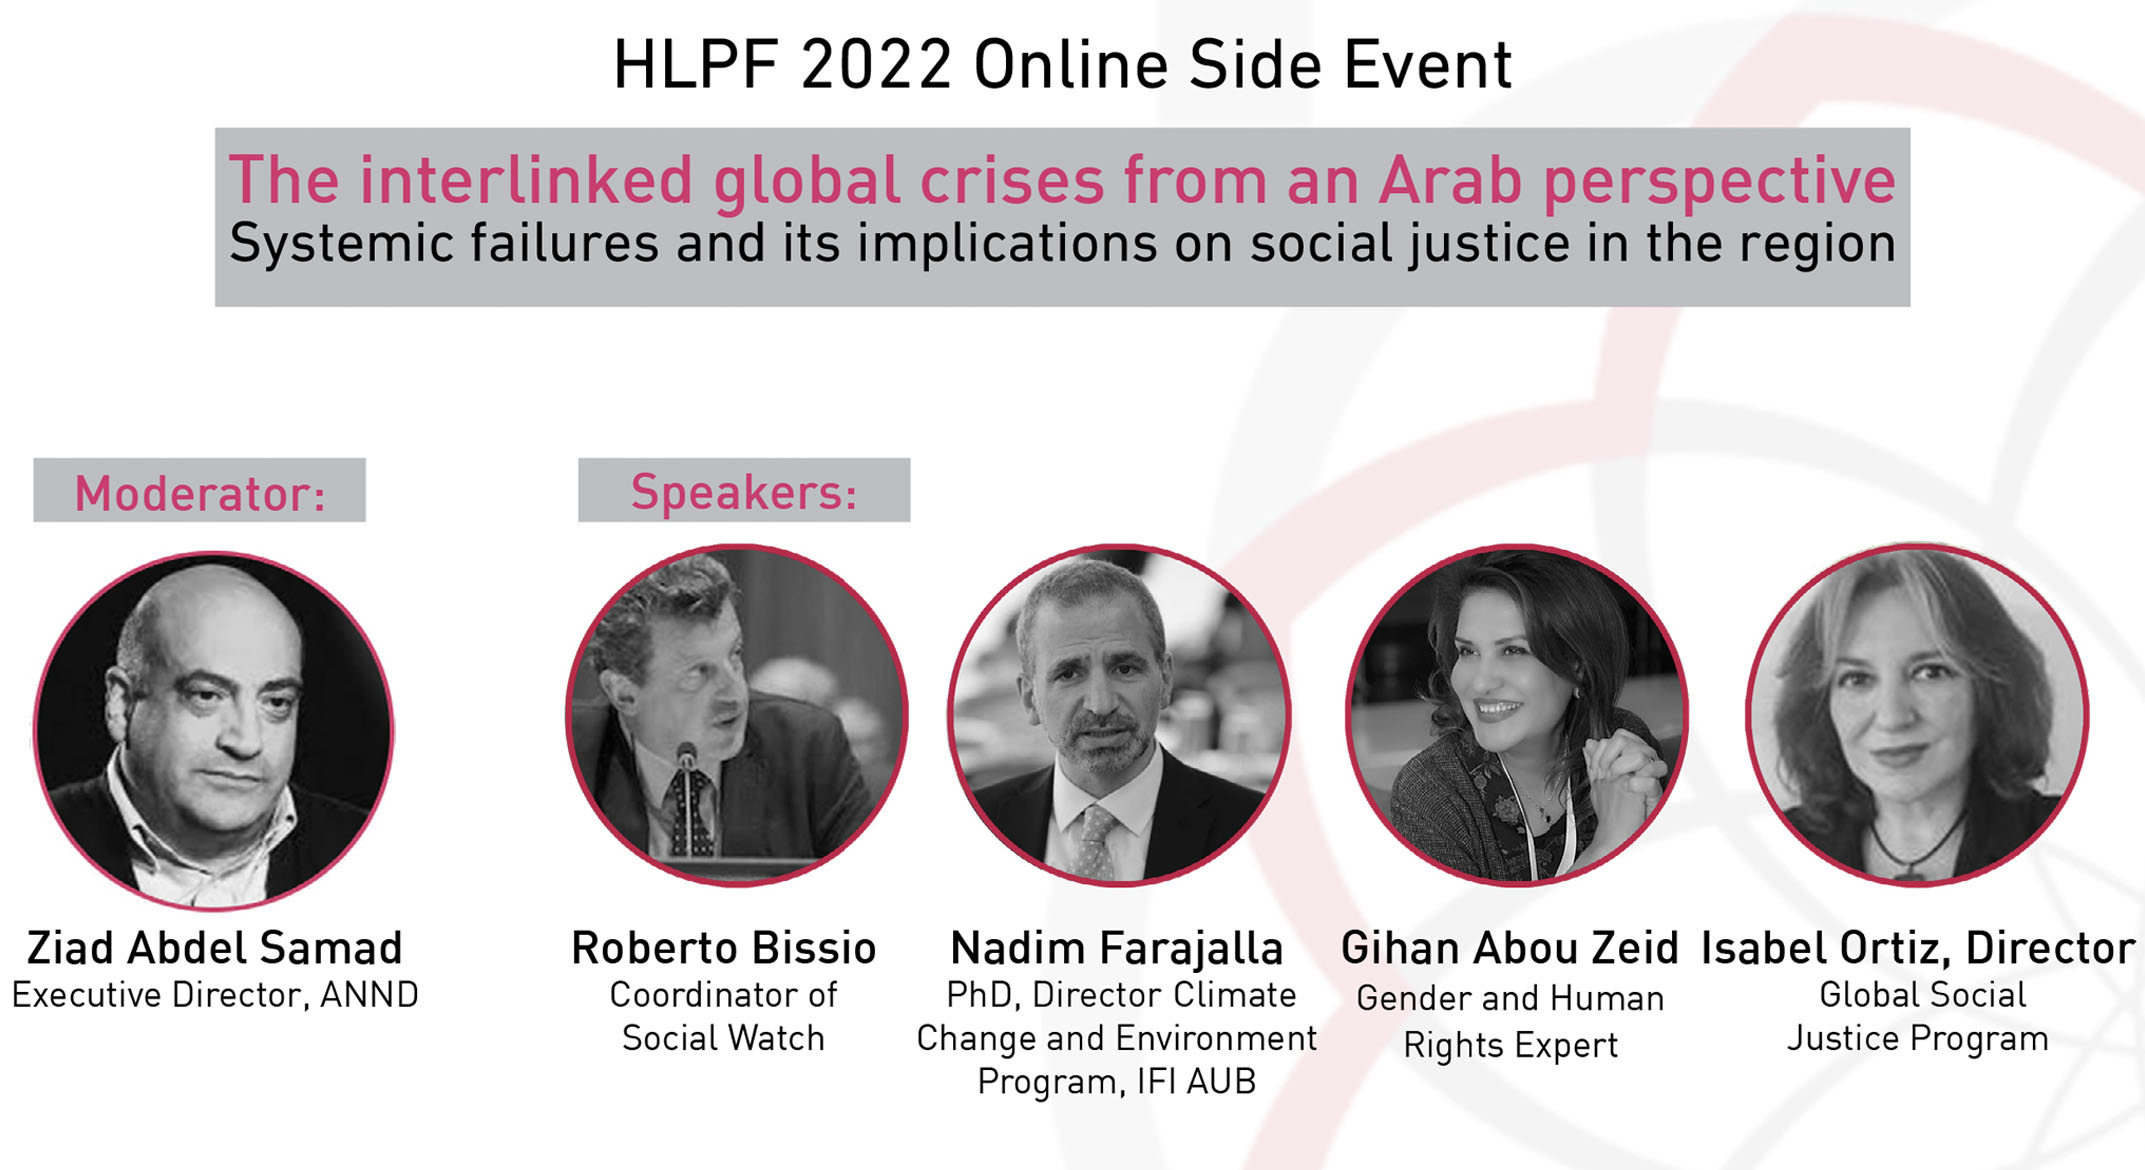 HLPF 2022 Online Side Event: The interlinked global crises from an Arab perspective